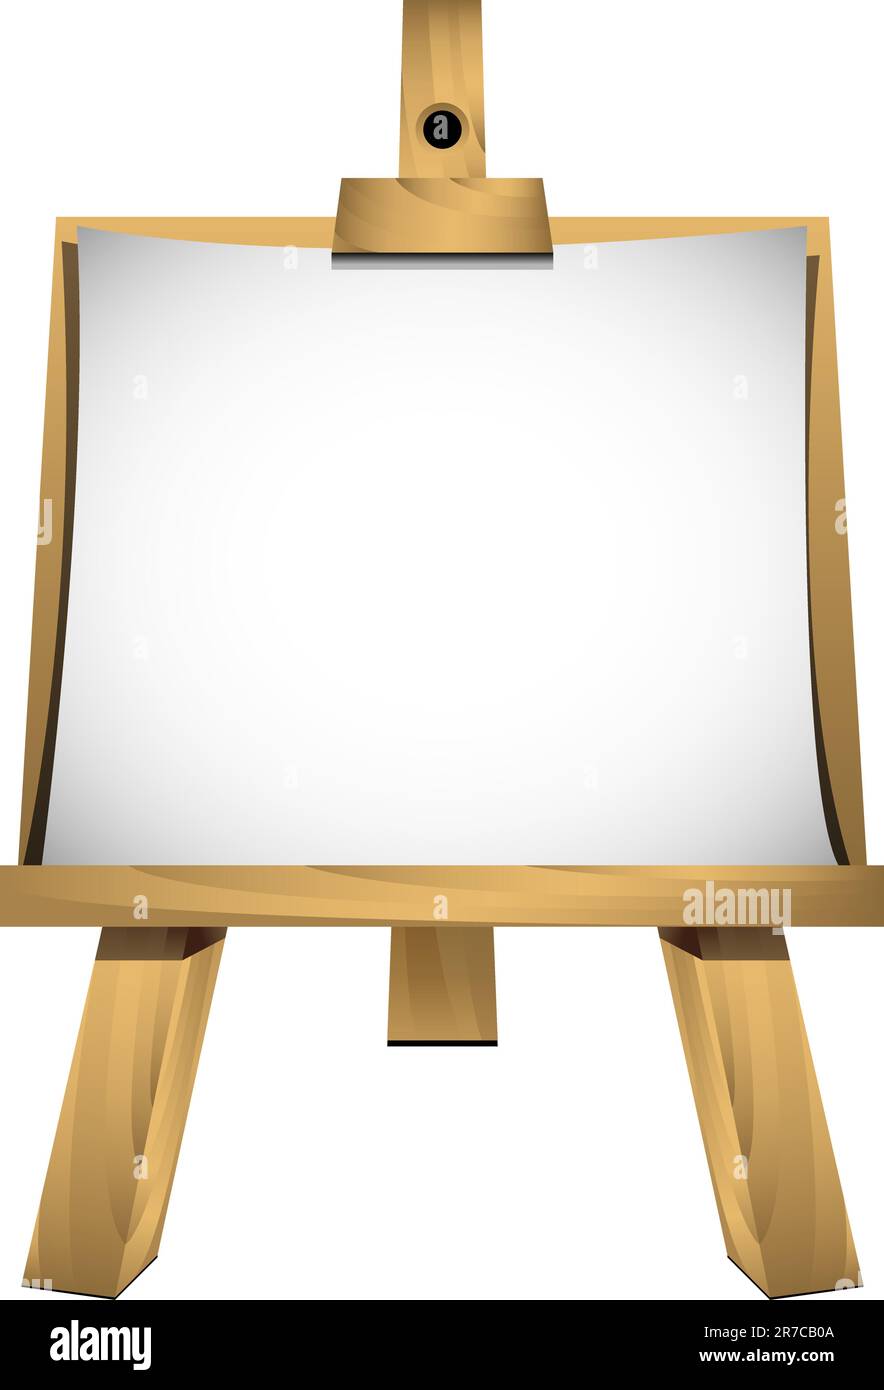 Easel with a blank sheet of white paper for your image or text. Isolated. EPS 8, AI, JPEG Stock Vector